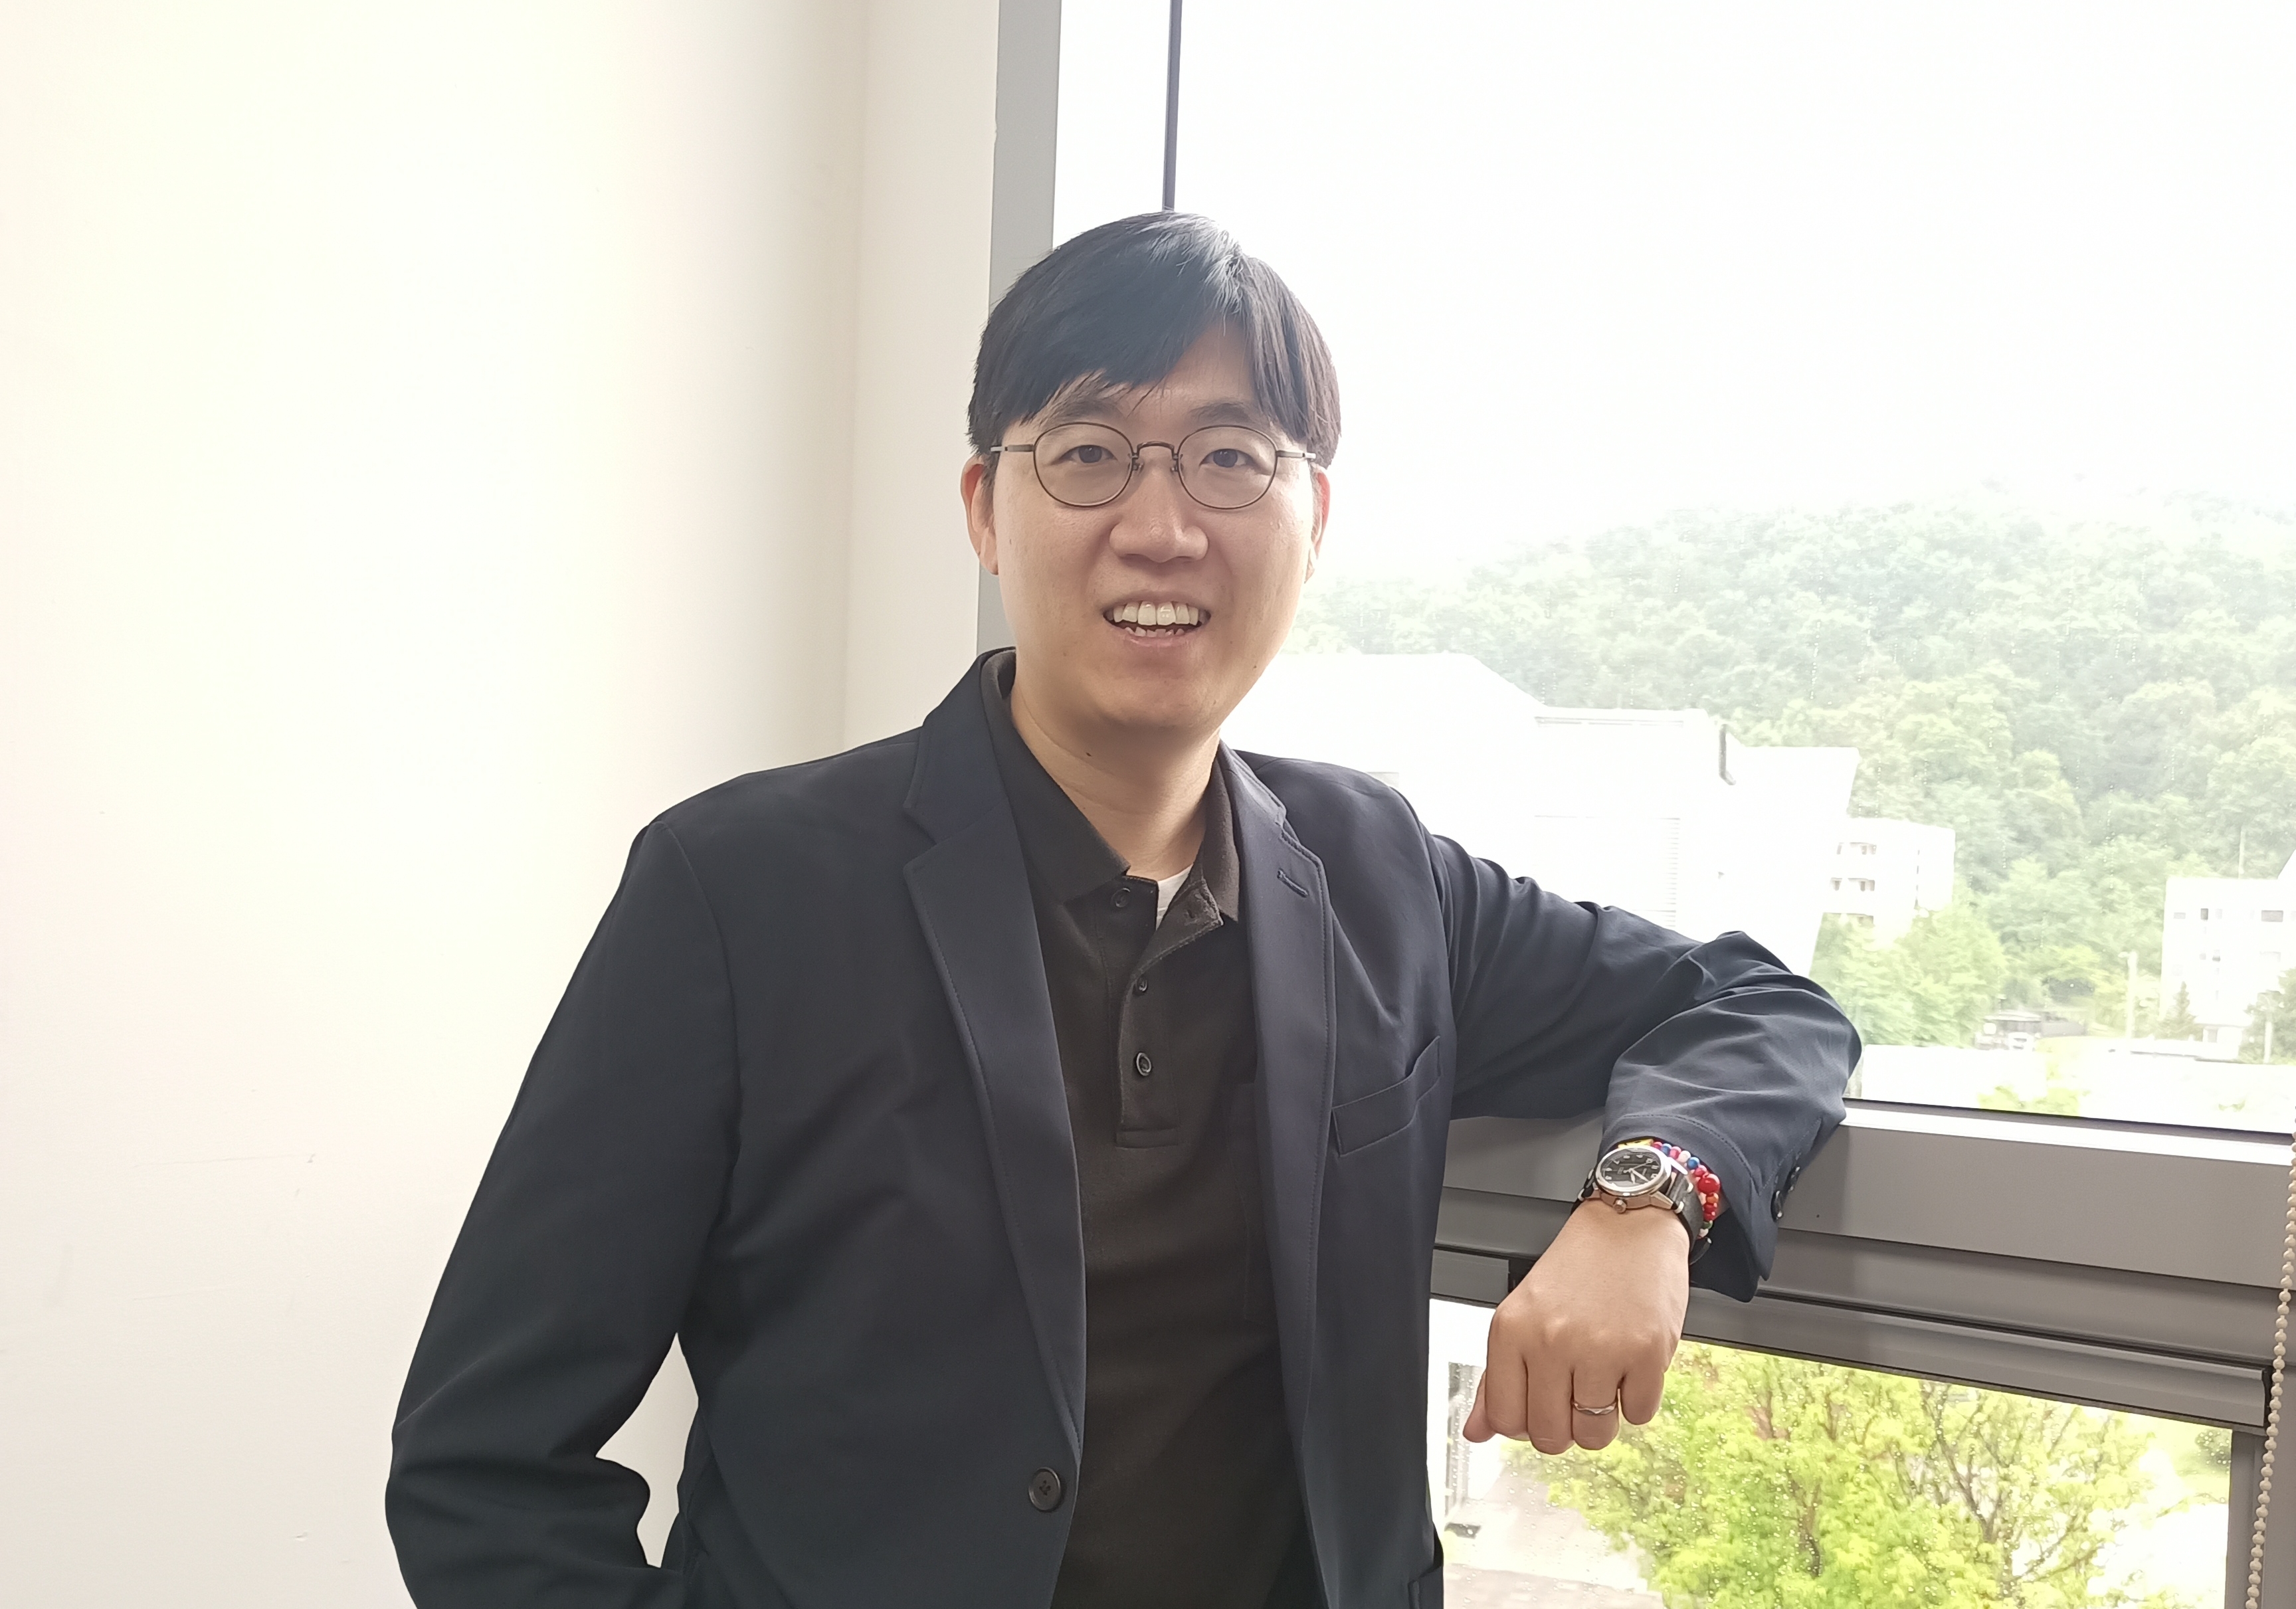 Get to Know Professor Sungkyu Shaun Park: KDI School’s Newest Faculty Member